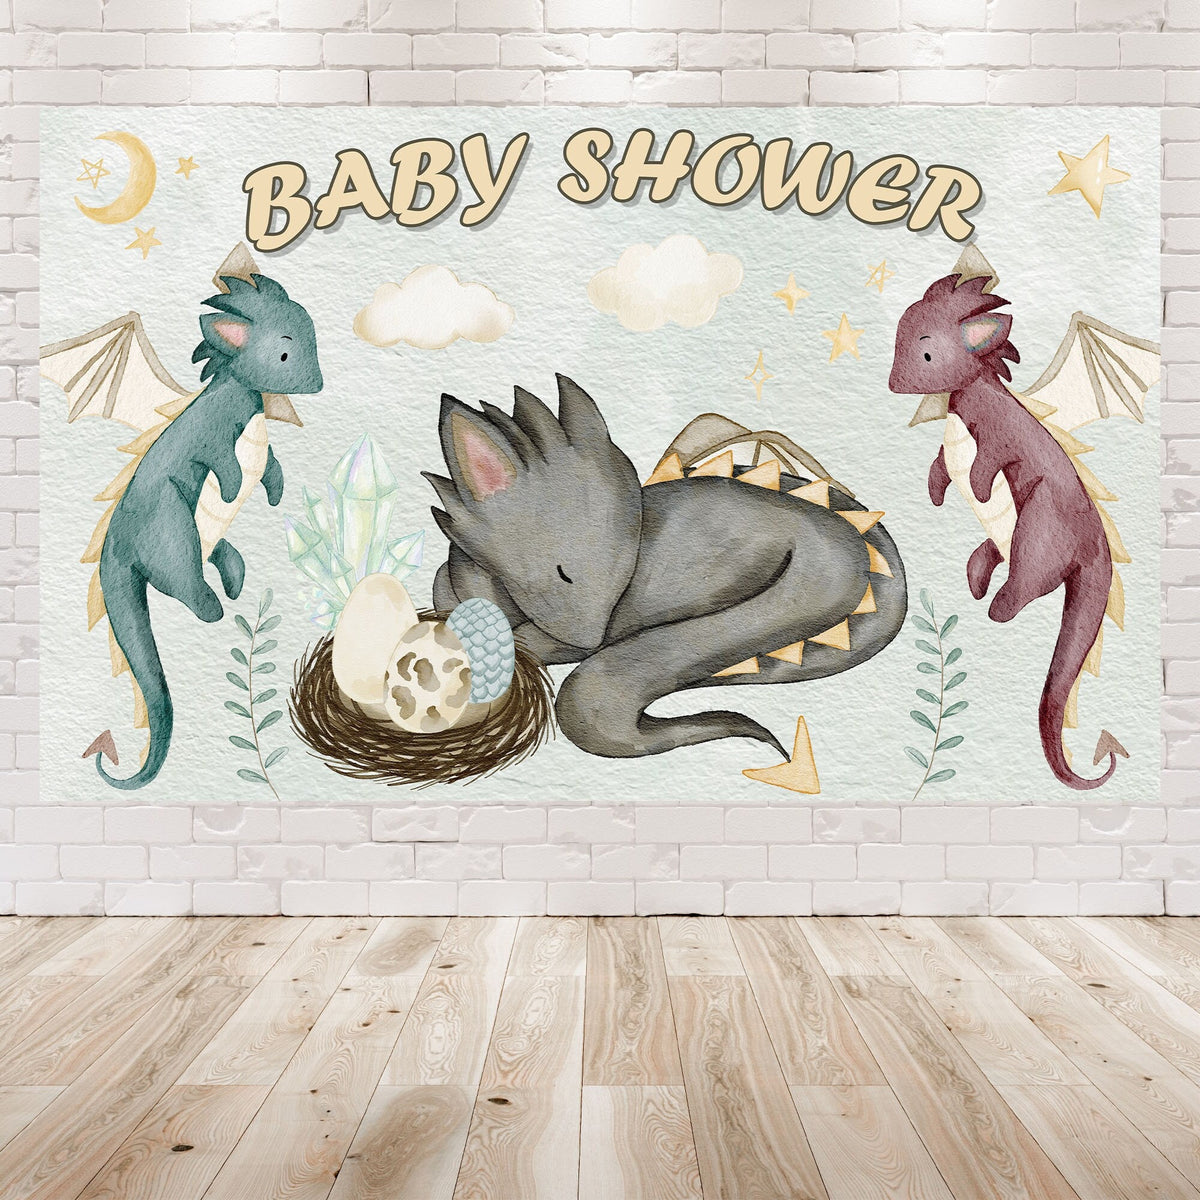 "Dreaming Dragons" Baby Shower Backdrop